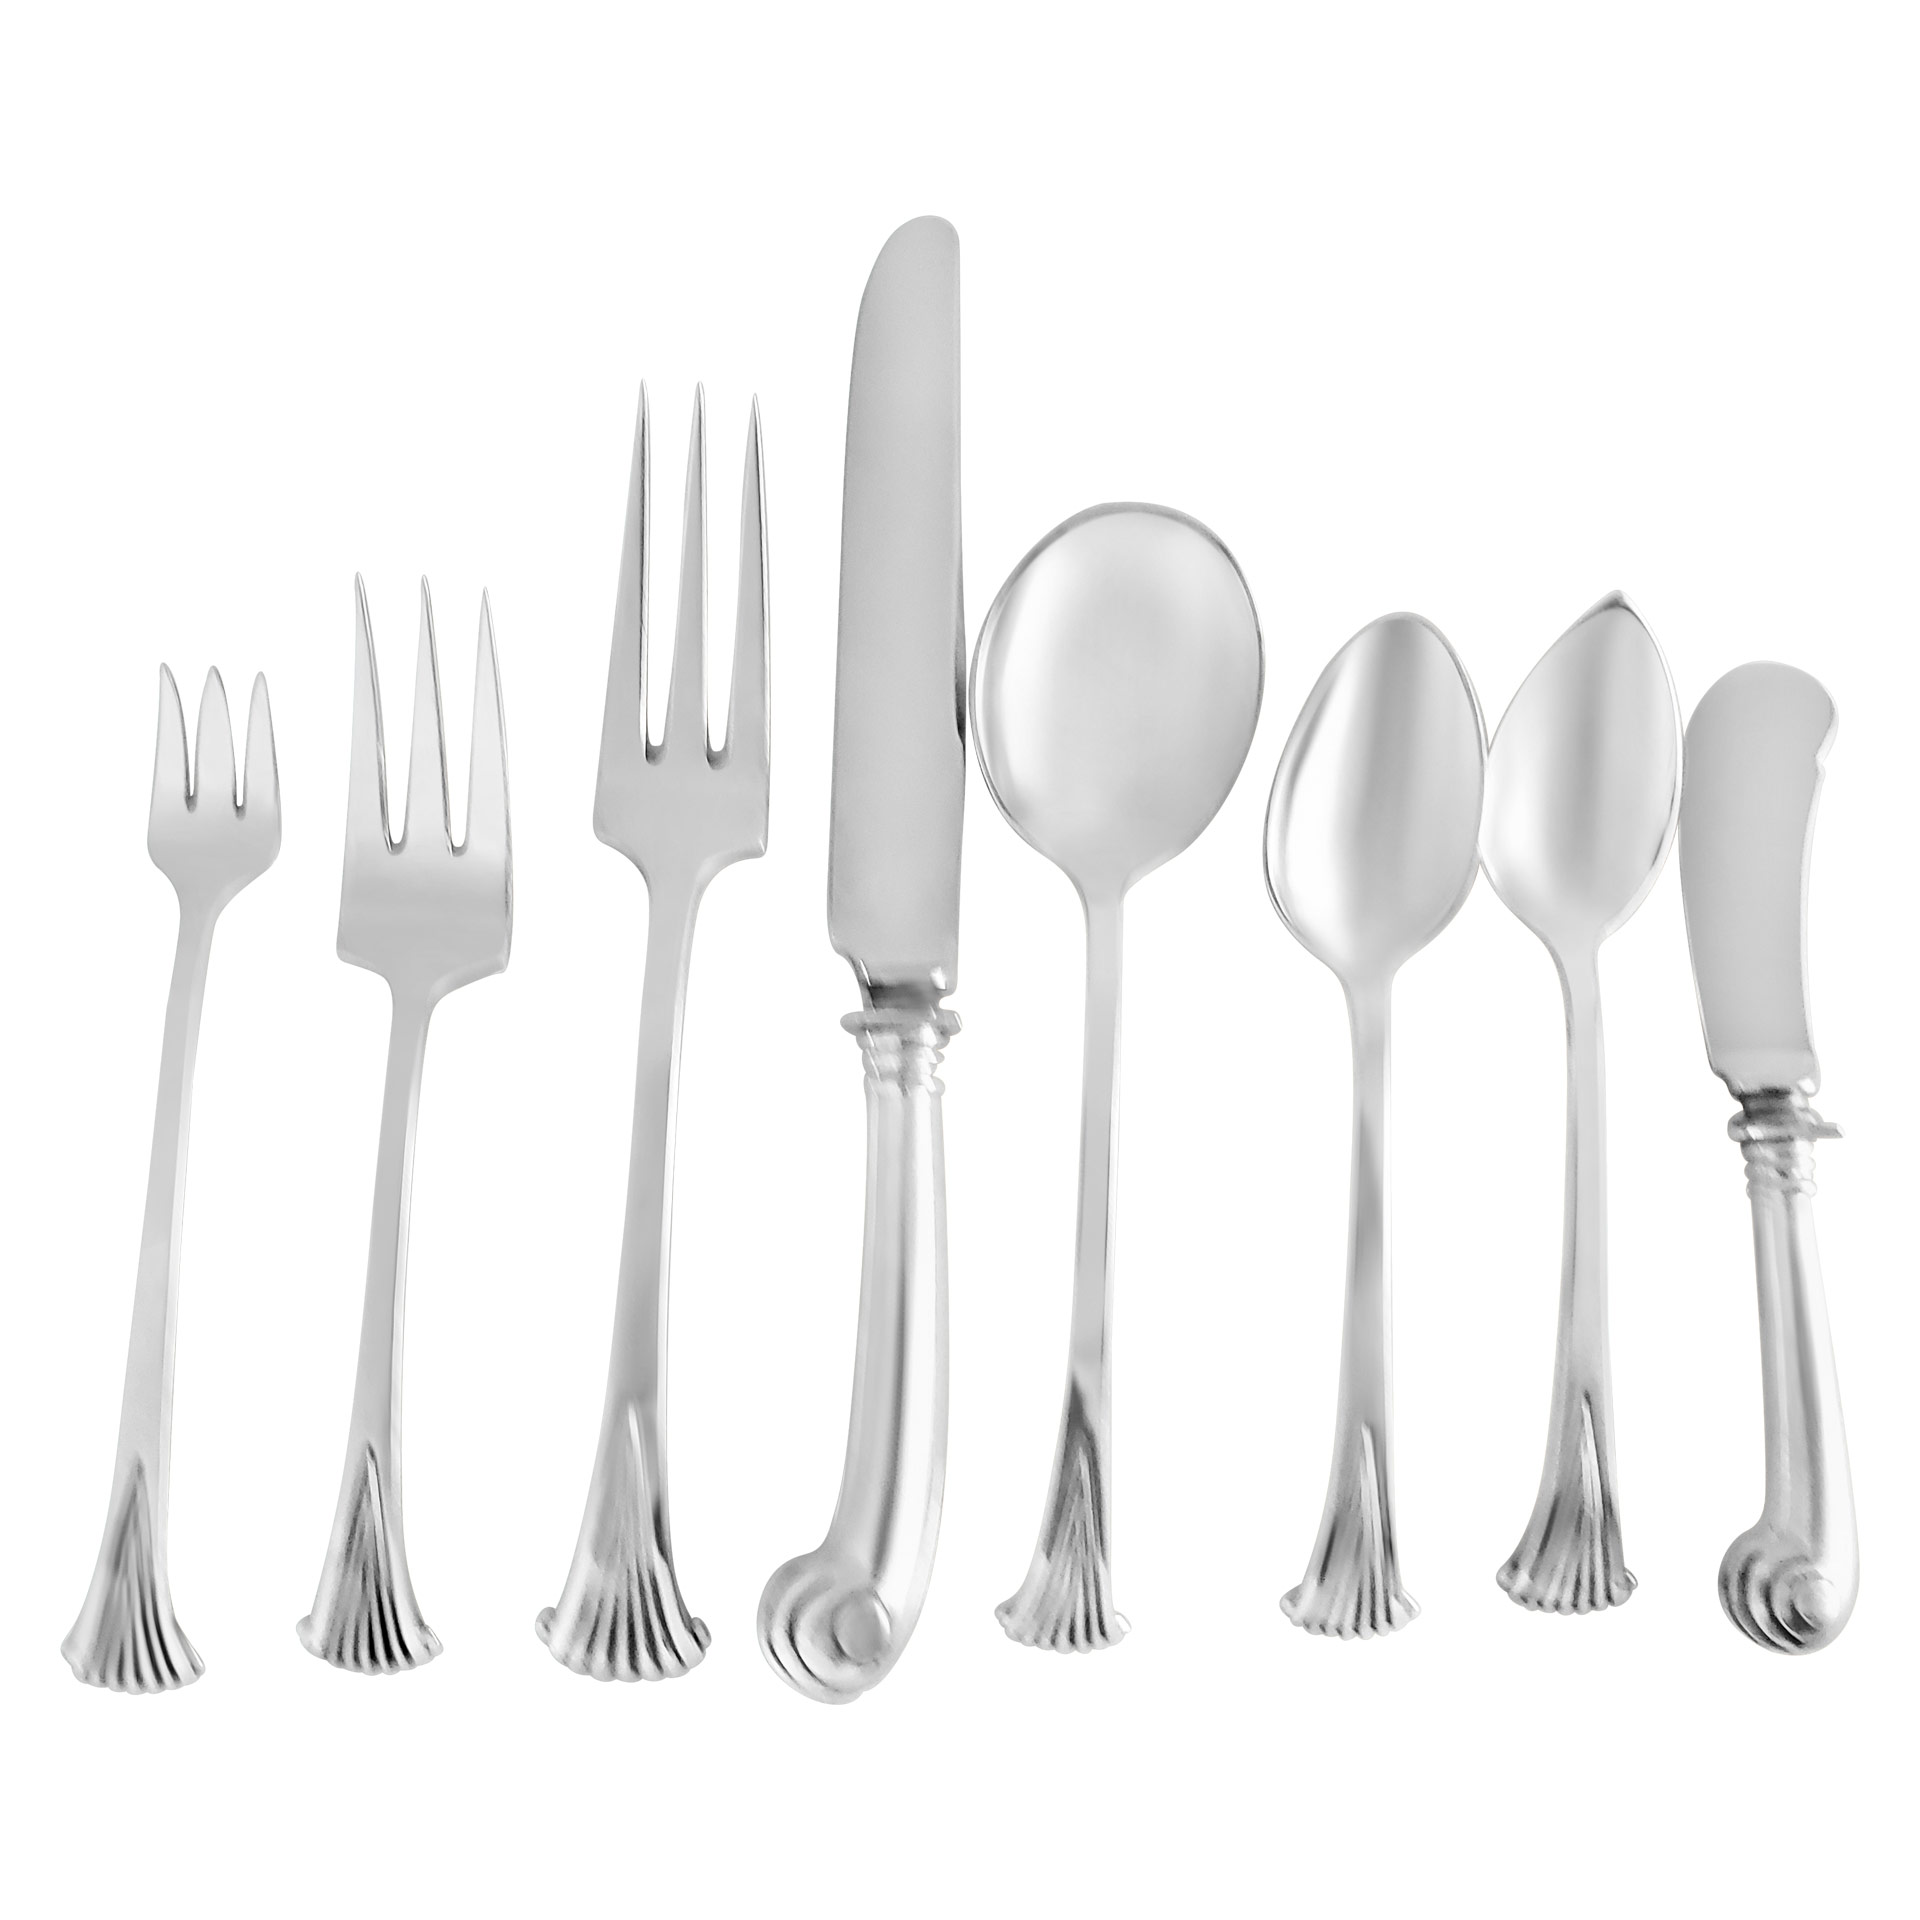 "ONSLOW" Sterling Silver Flatware Set by Tuttle, patented in 1973. 8 place Setting for 12 + 10 Serving Pieces- Over 3800 grams of sterling silver- image 1